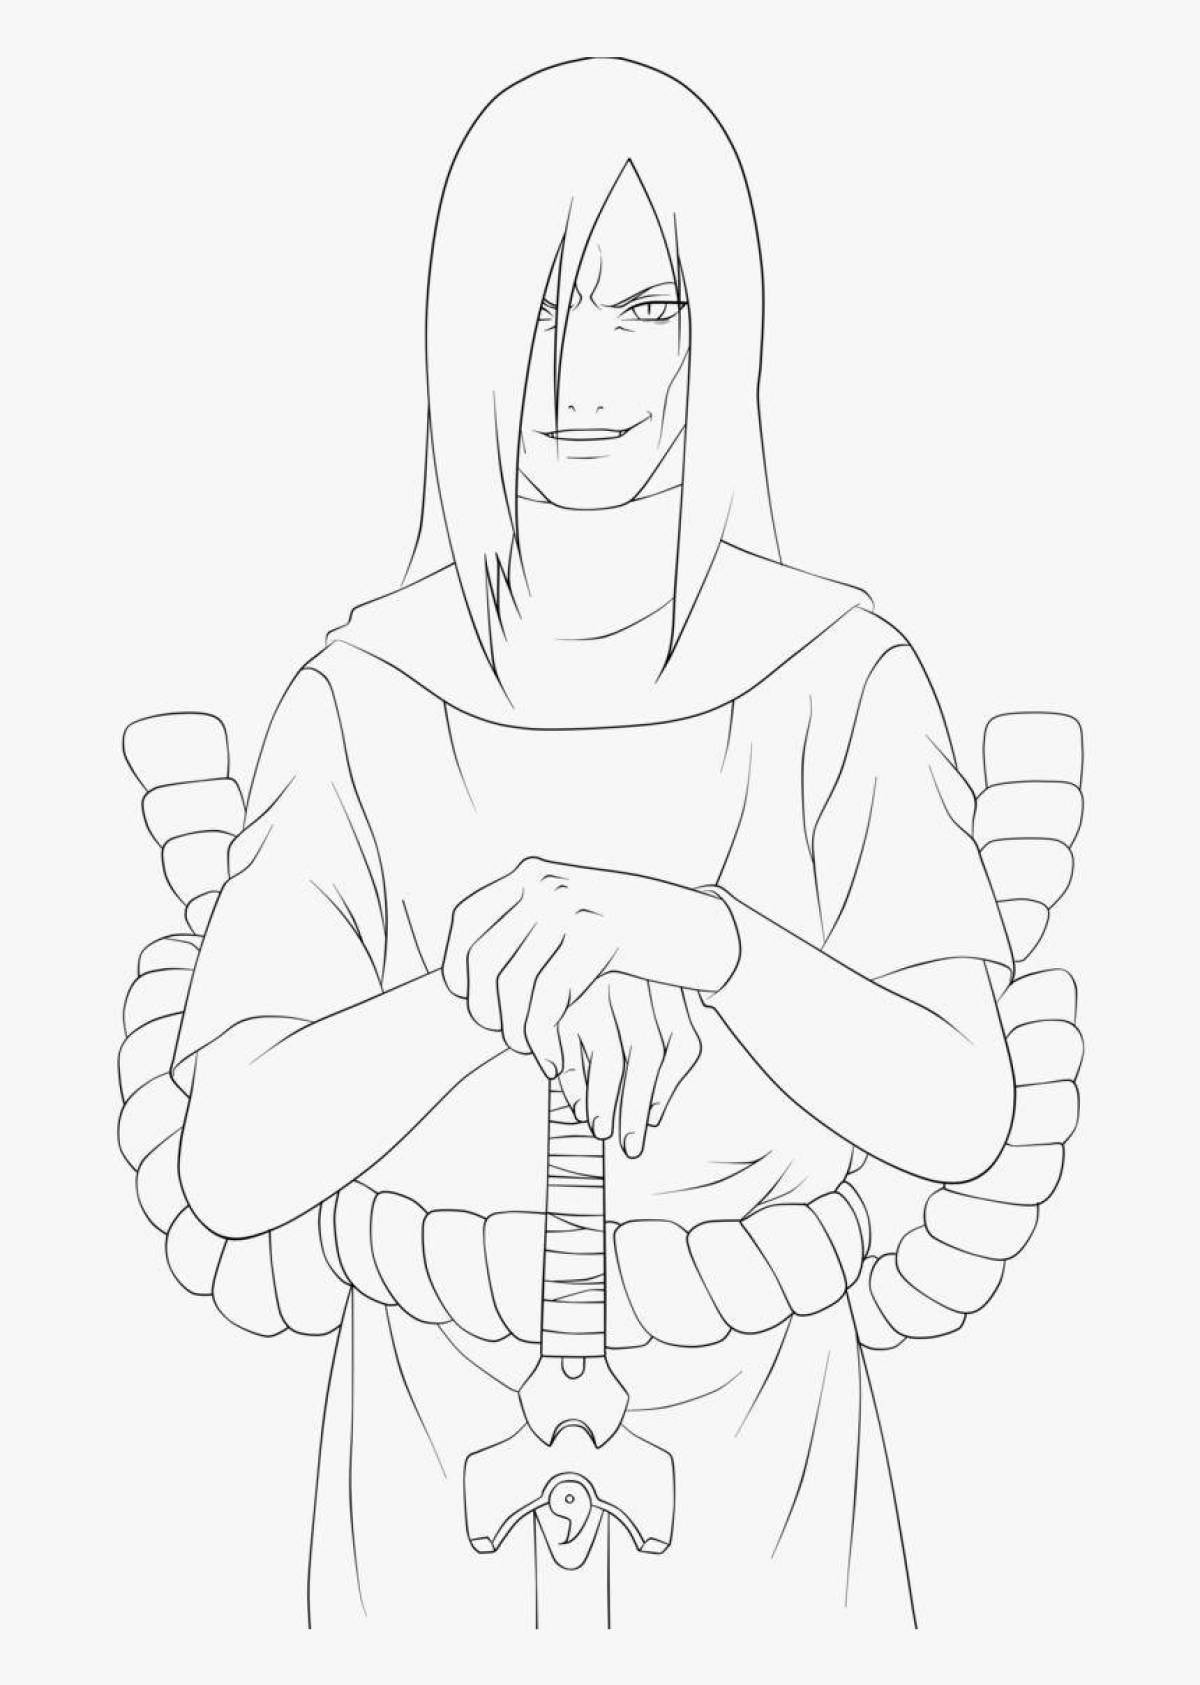 Orochimaru's colorful coloring page